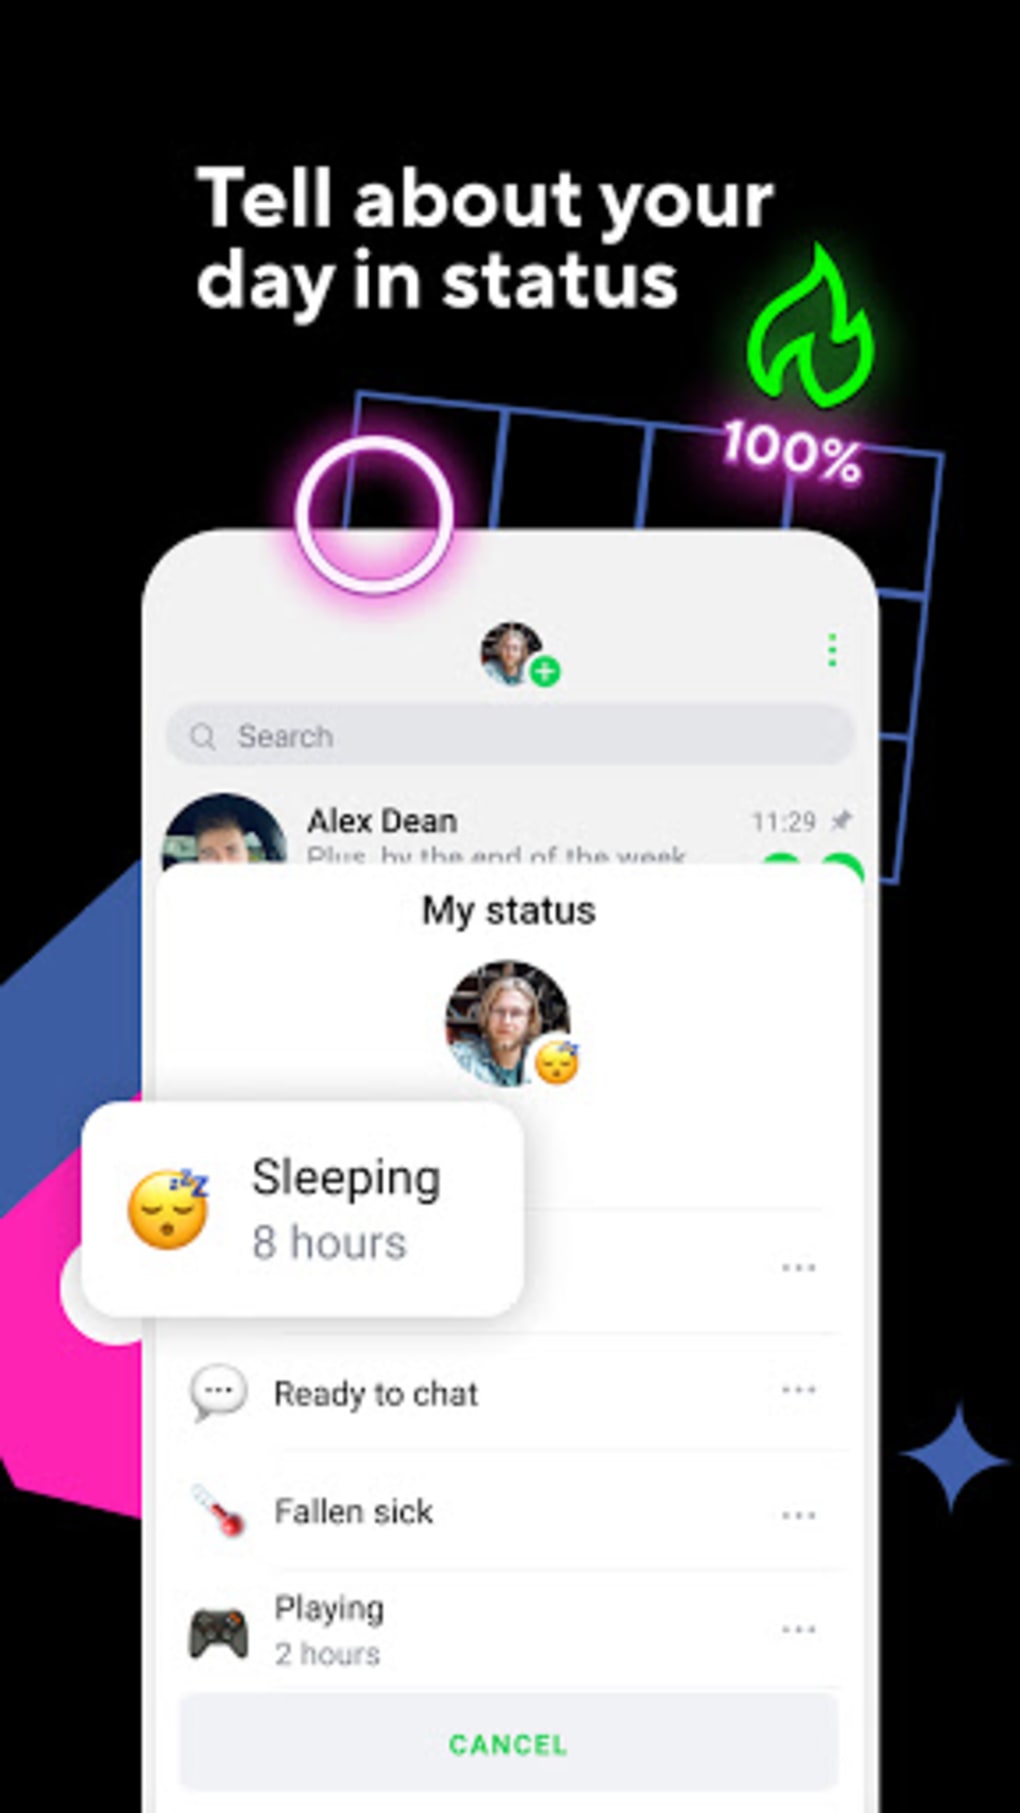 VK / ICQ Introduces Live Chats